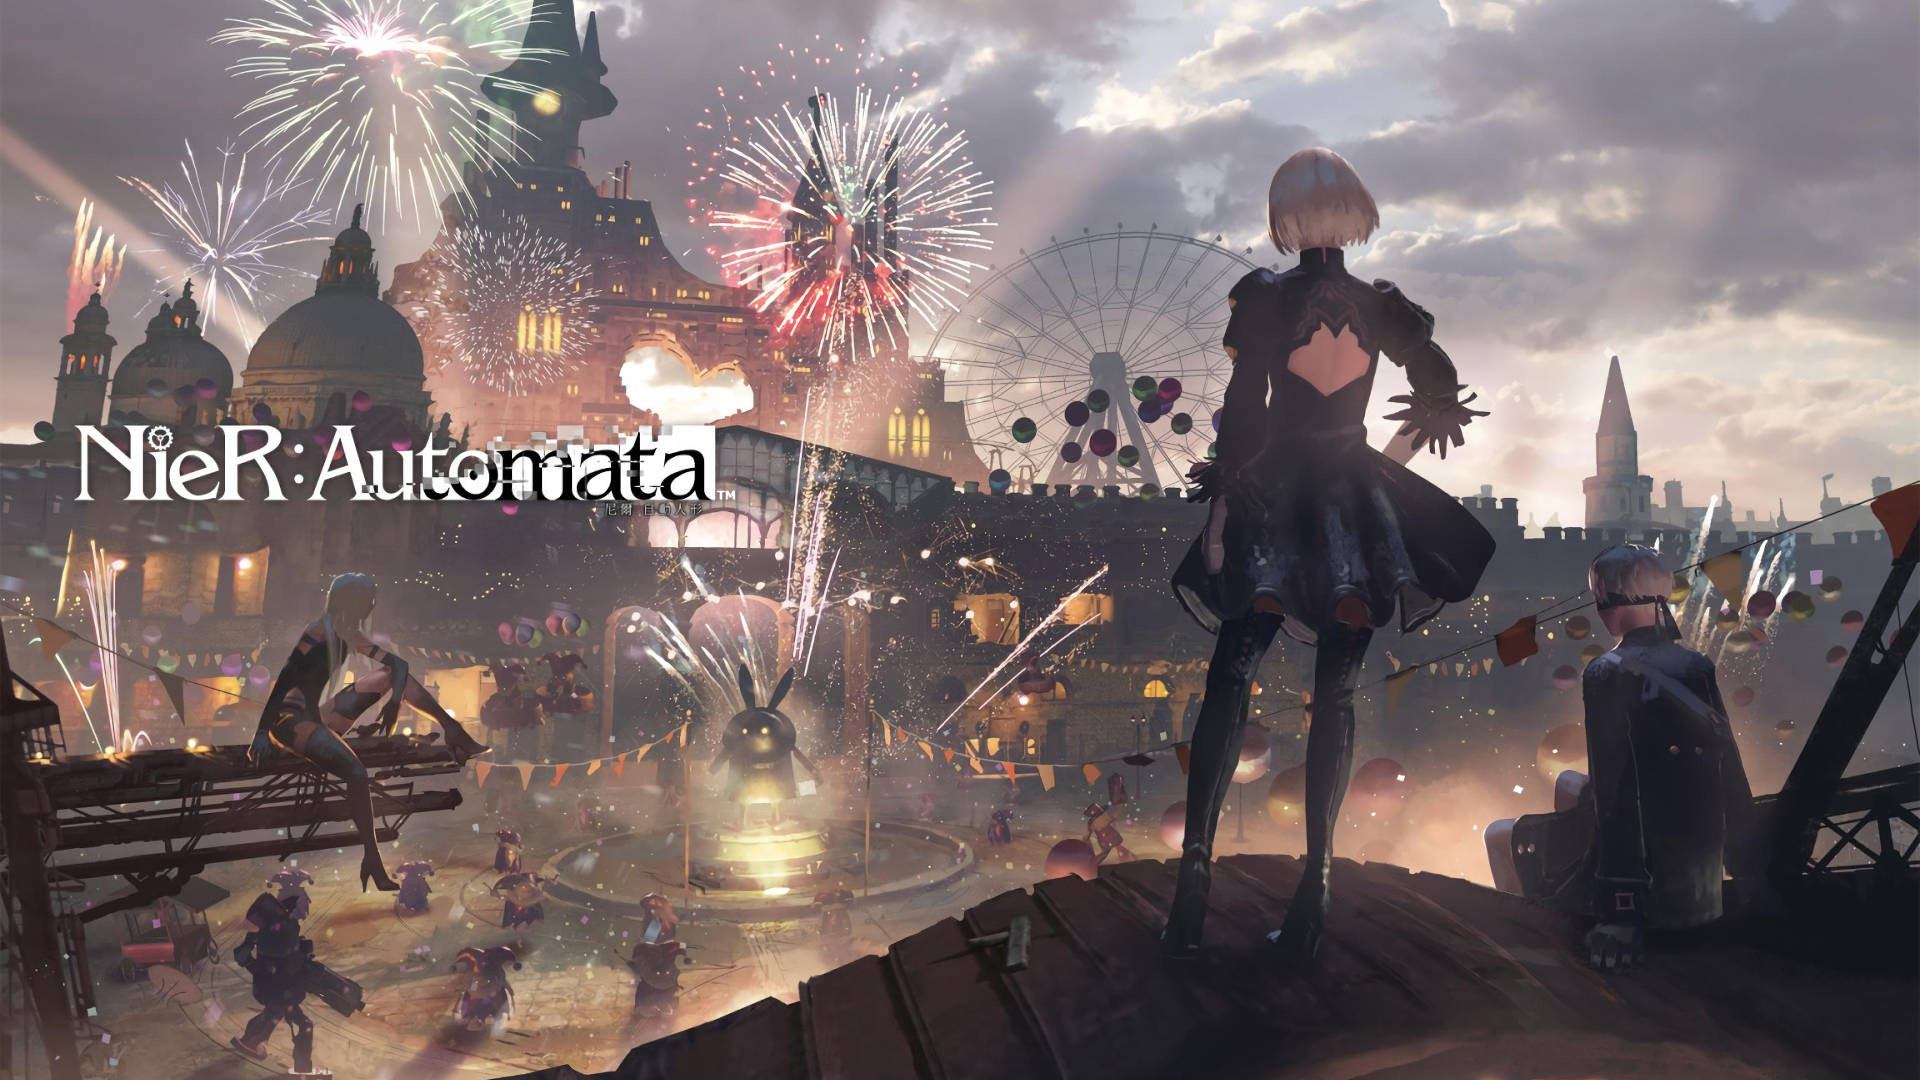 Nier Automata 2b, 9s And A2 On The Carnival